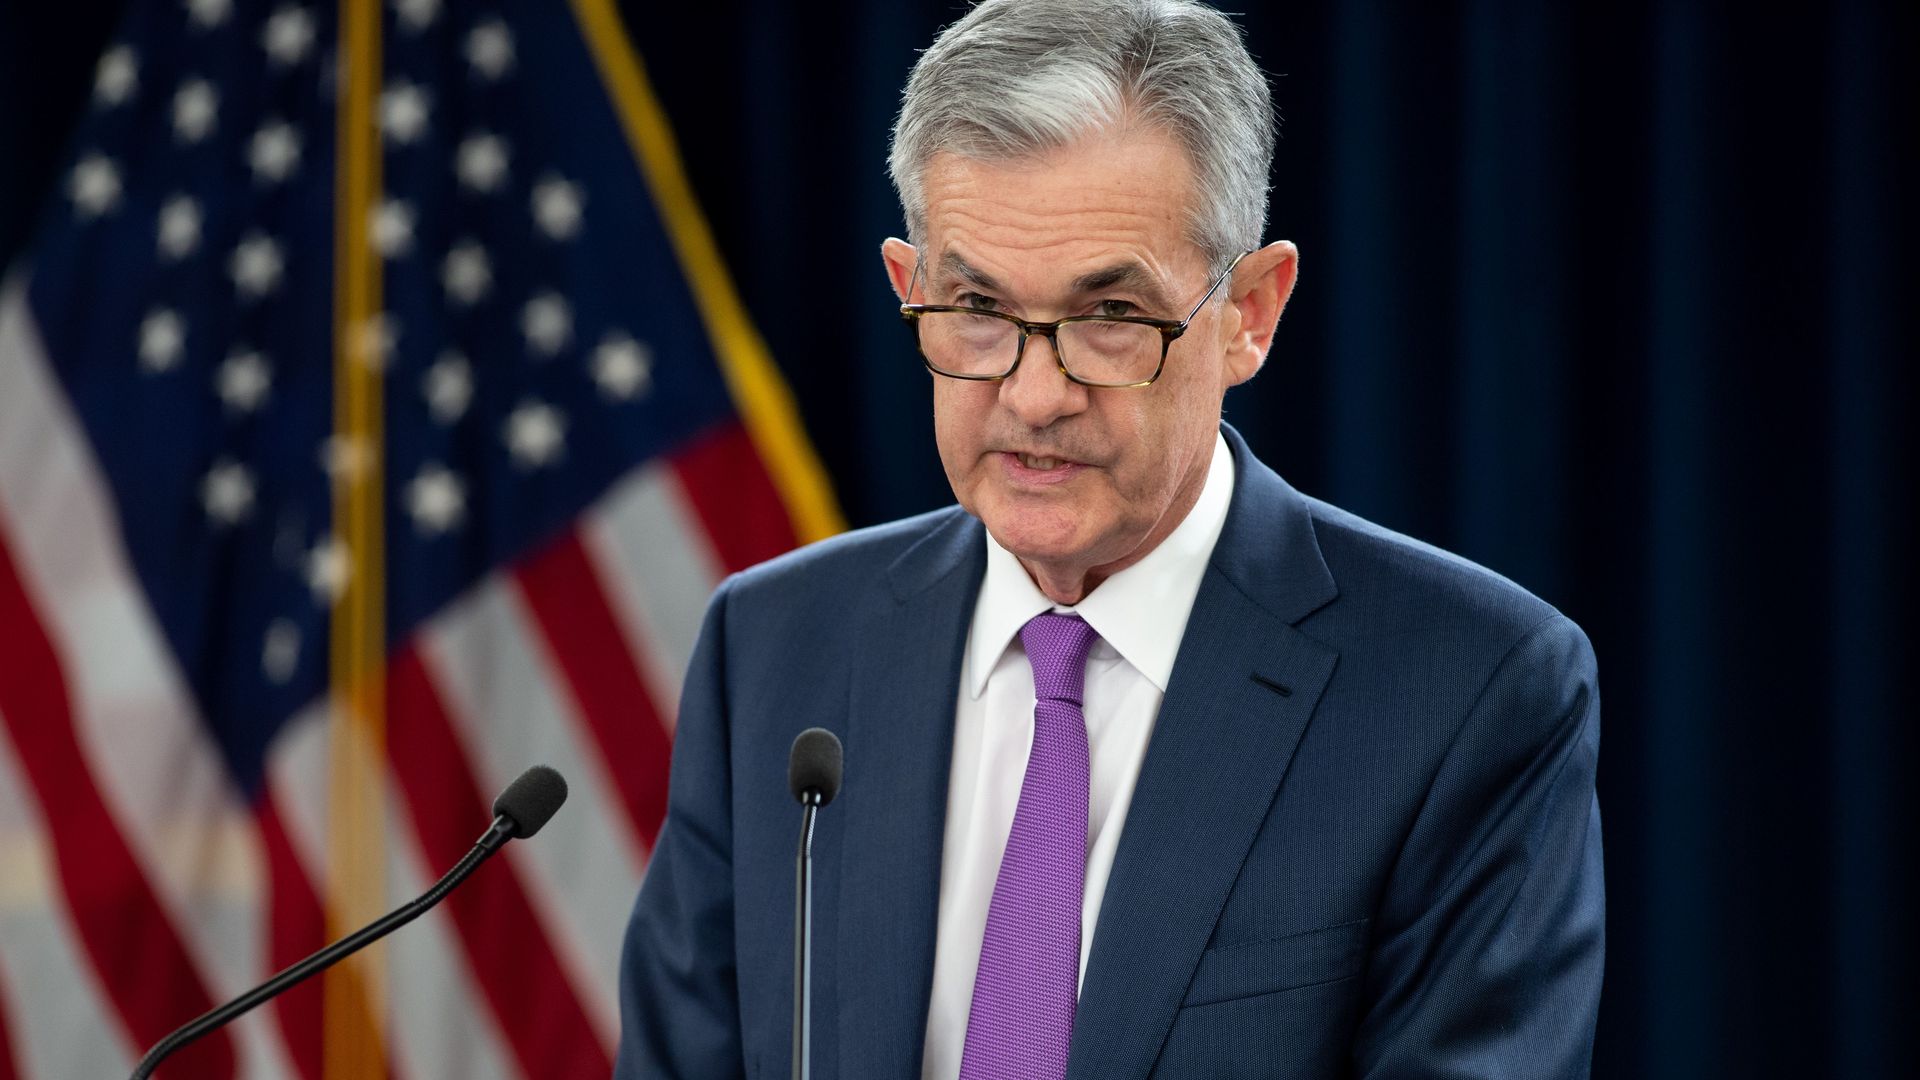 Federal Reserve Chairman Jerome Powell standing at a podium at a press conference.